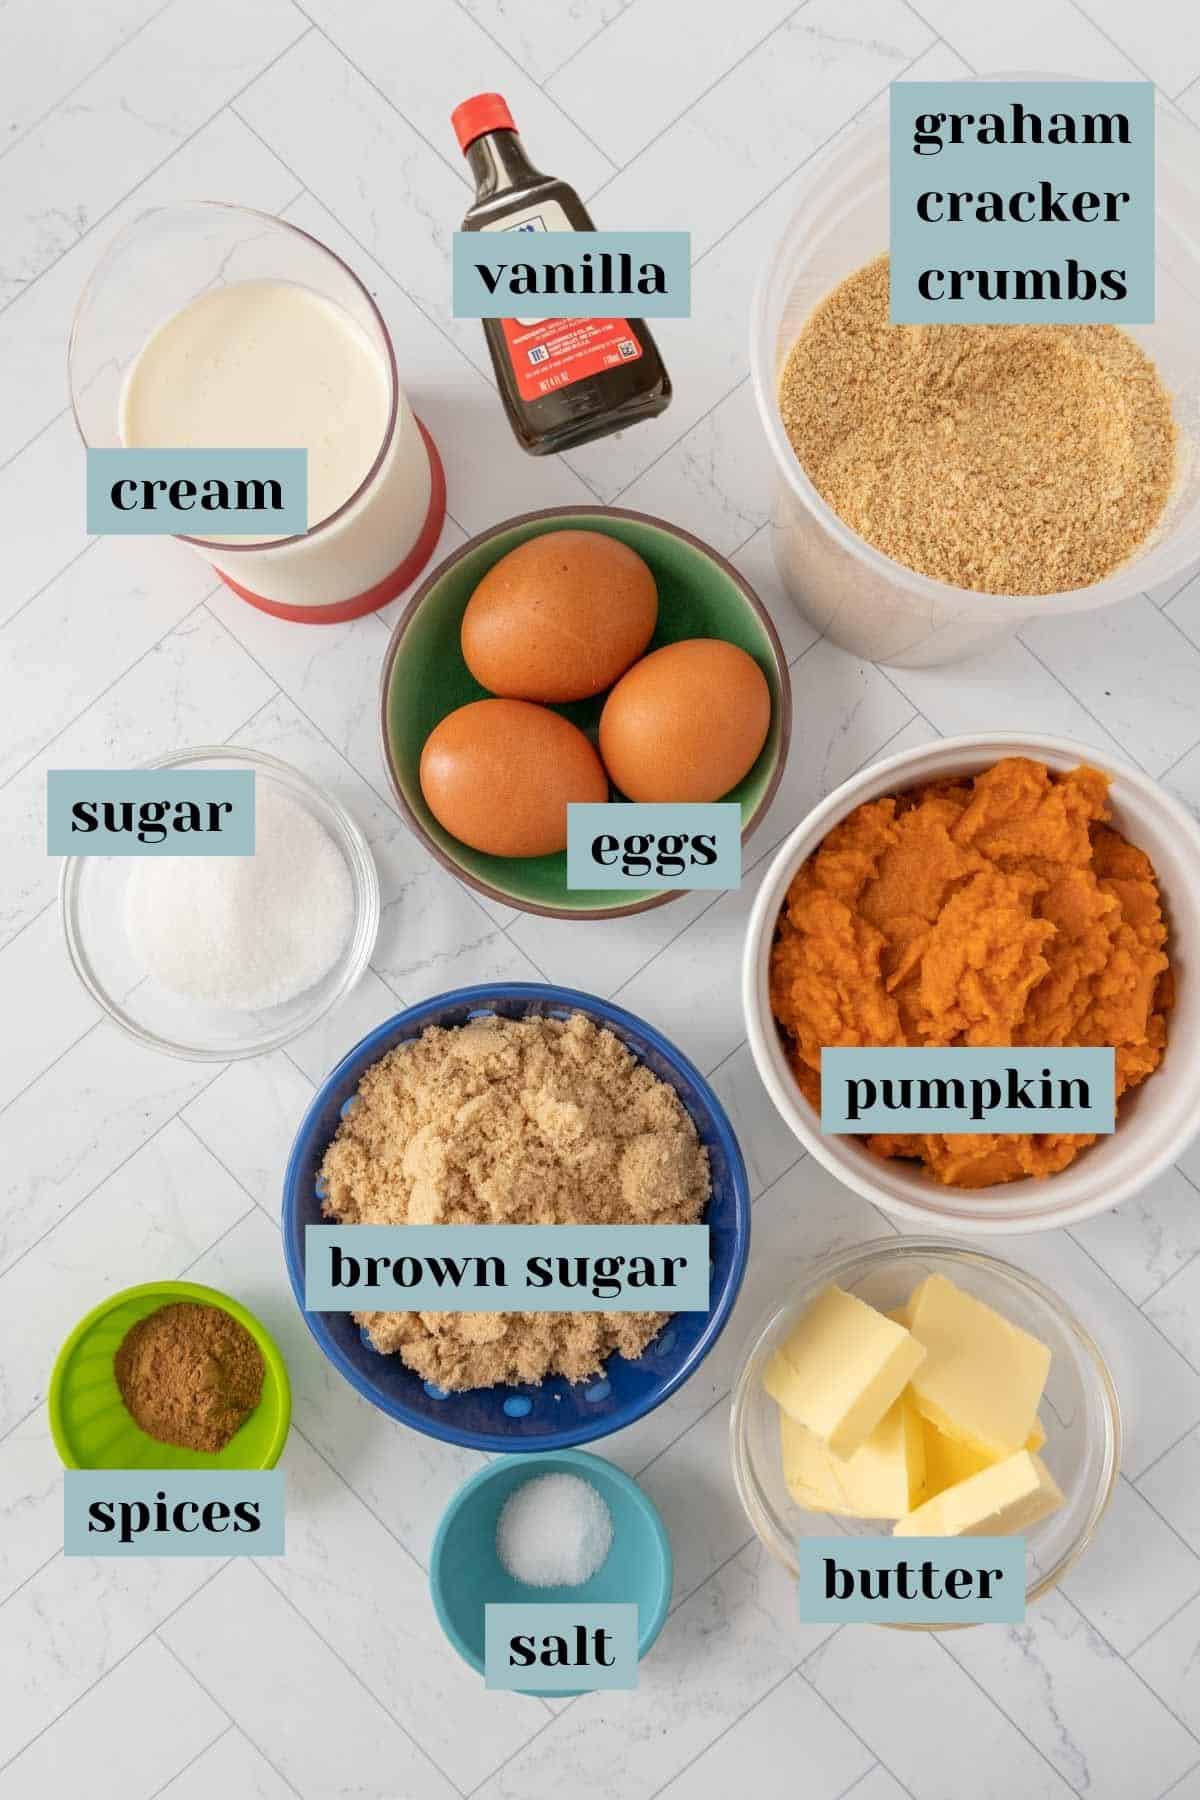 The ingredients for a pumpkin pie are laid out on a marble countertop.